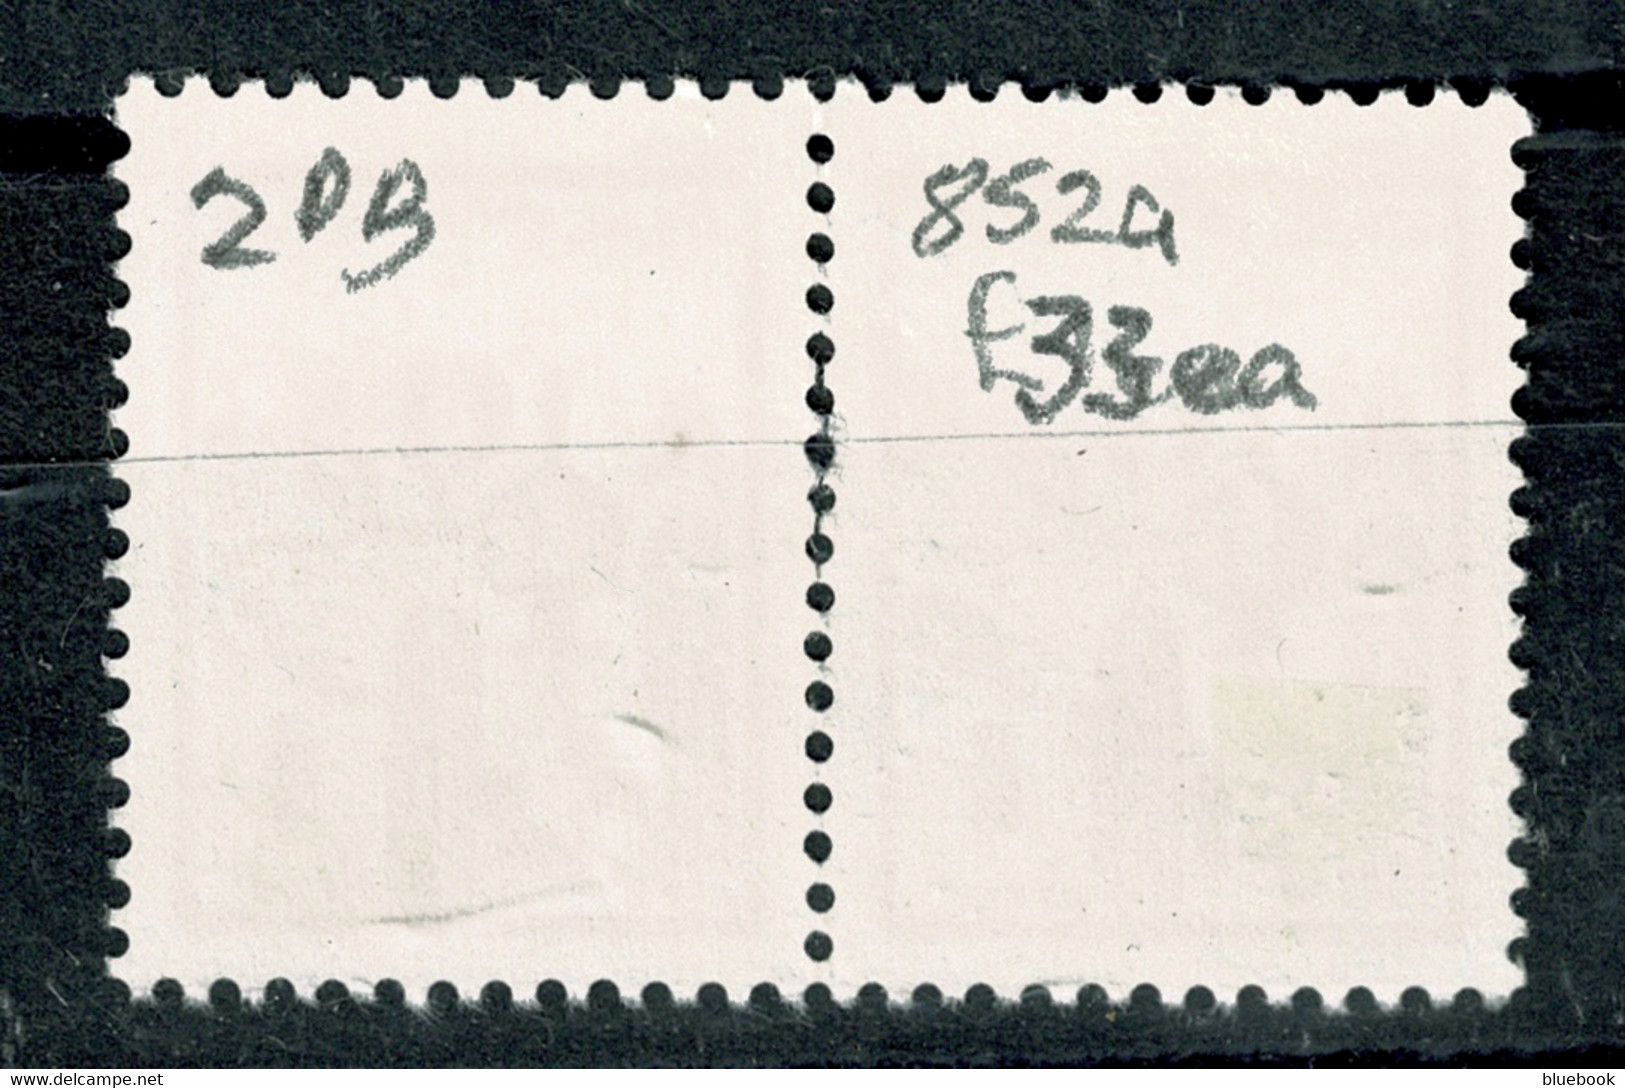 Ref 1577 - Israel 1982 500s Stamps Pair With Phosphor Bands SG 852a - Usados (con Tab)